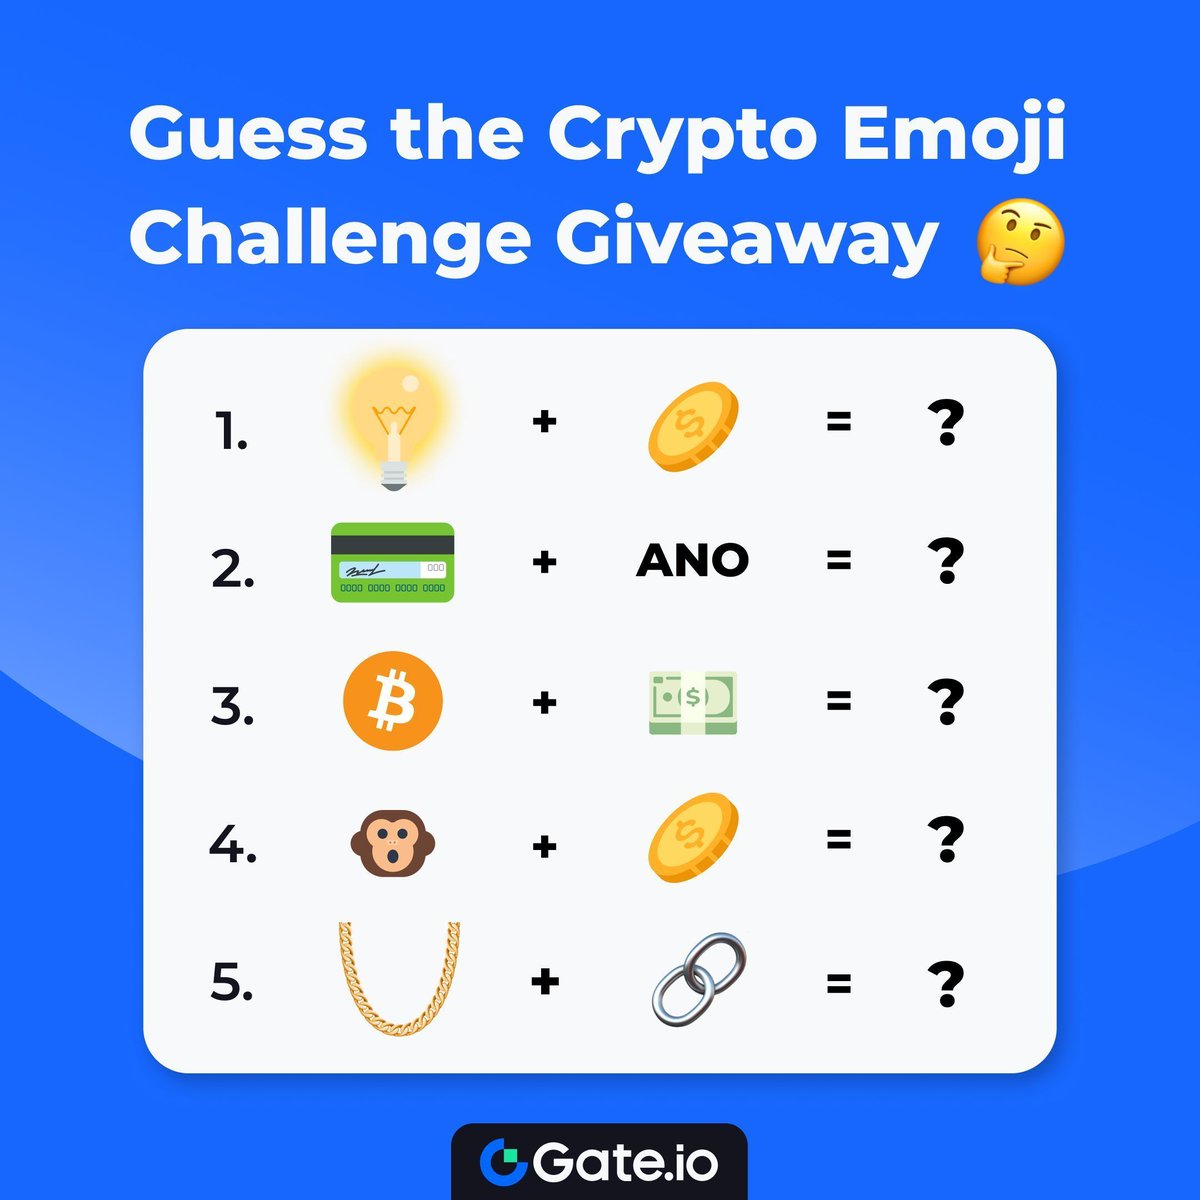 🎉 Guess the Crypto Emoji Challenge! 🏆 10 winners * $10 each To join: 1. Follow @gate_io 2. Like, Share, and Tag 3 friends 3. Write your correct answers to win! Deadline: May 15th, 16:00 UTC #Gateio #GateEmojiChallenge